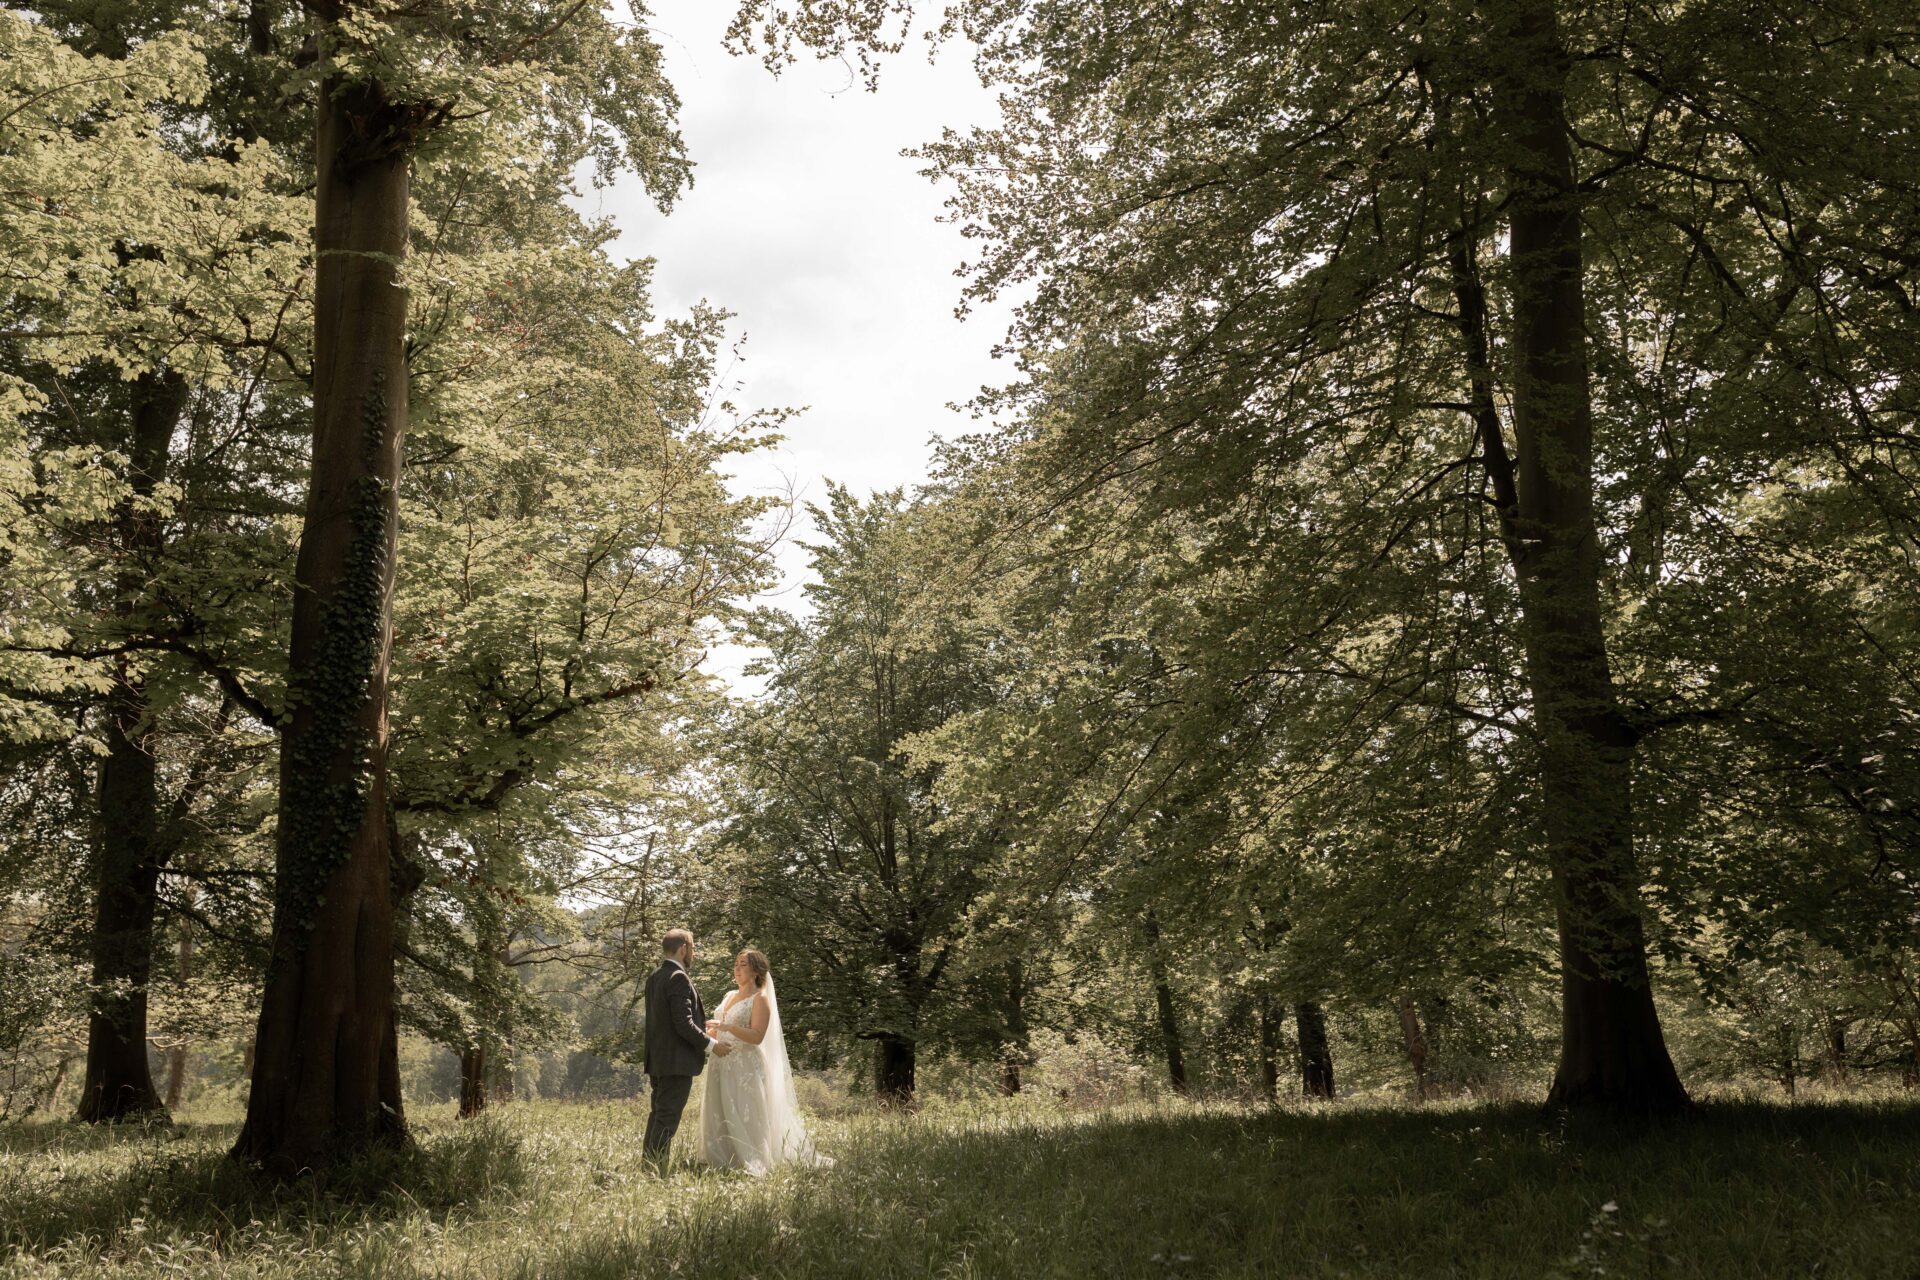 The bride and groom stop for a kiss in the magnificent woods at Old Luxters Barn in Oxfordshire